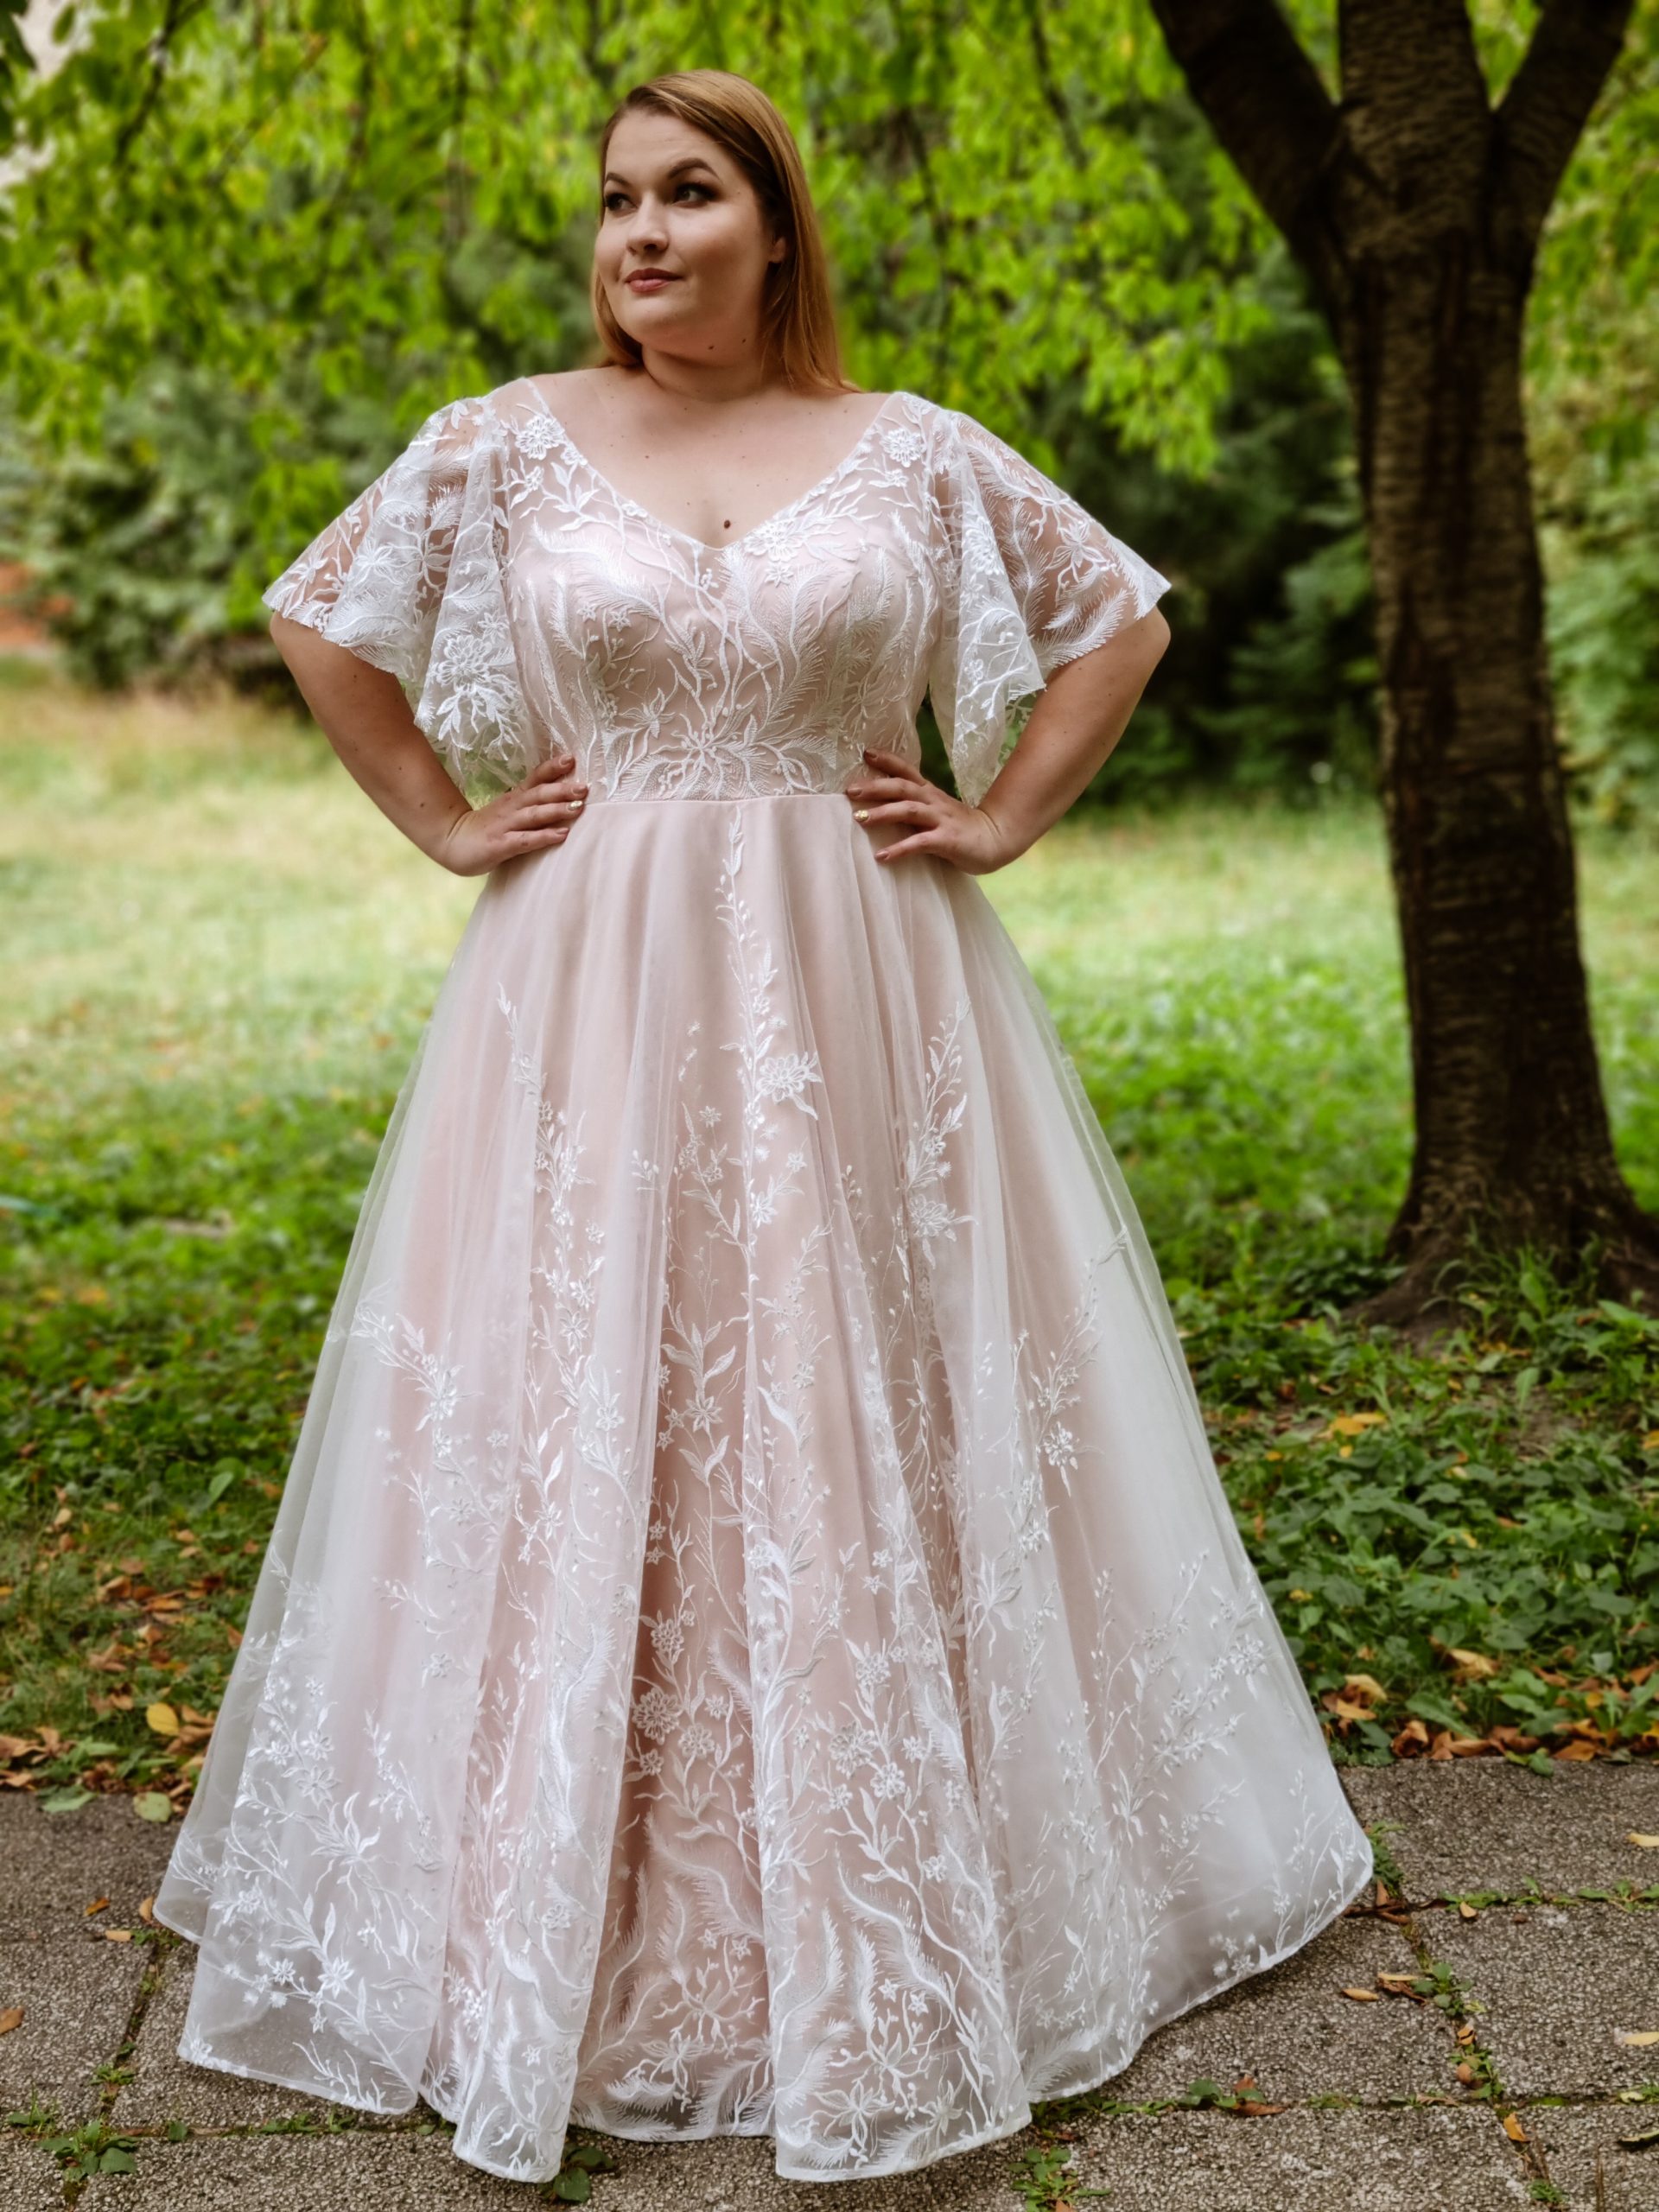 Plus Size Wedding Dresses For the Most Beautiful and Curvy Brides